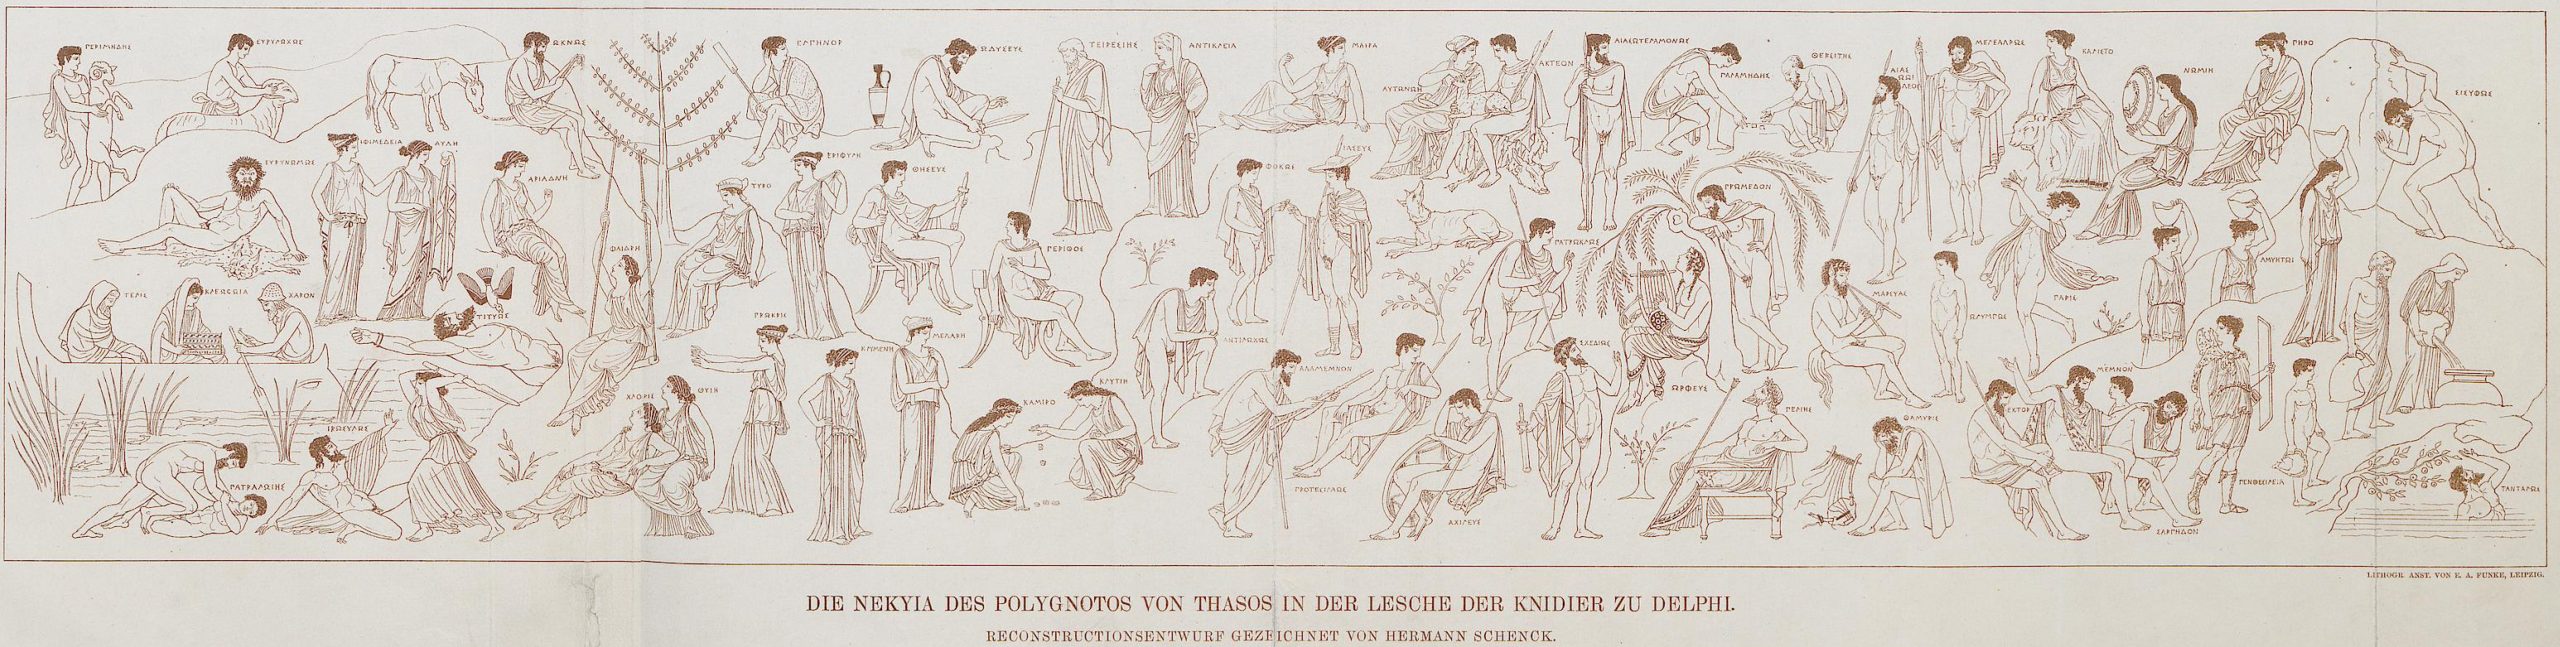 Line drawing of over 50 figures in different scenes of the Underworld, including Sisyphus pushing his rock up the hill, Tityus having his organs eaten by a bird, Teiresias, Anticleia, and Agamemnon. On the far left, Odysseus' crew members bring animals to be sacrificed.